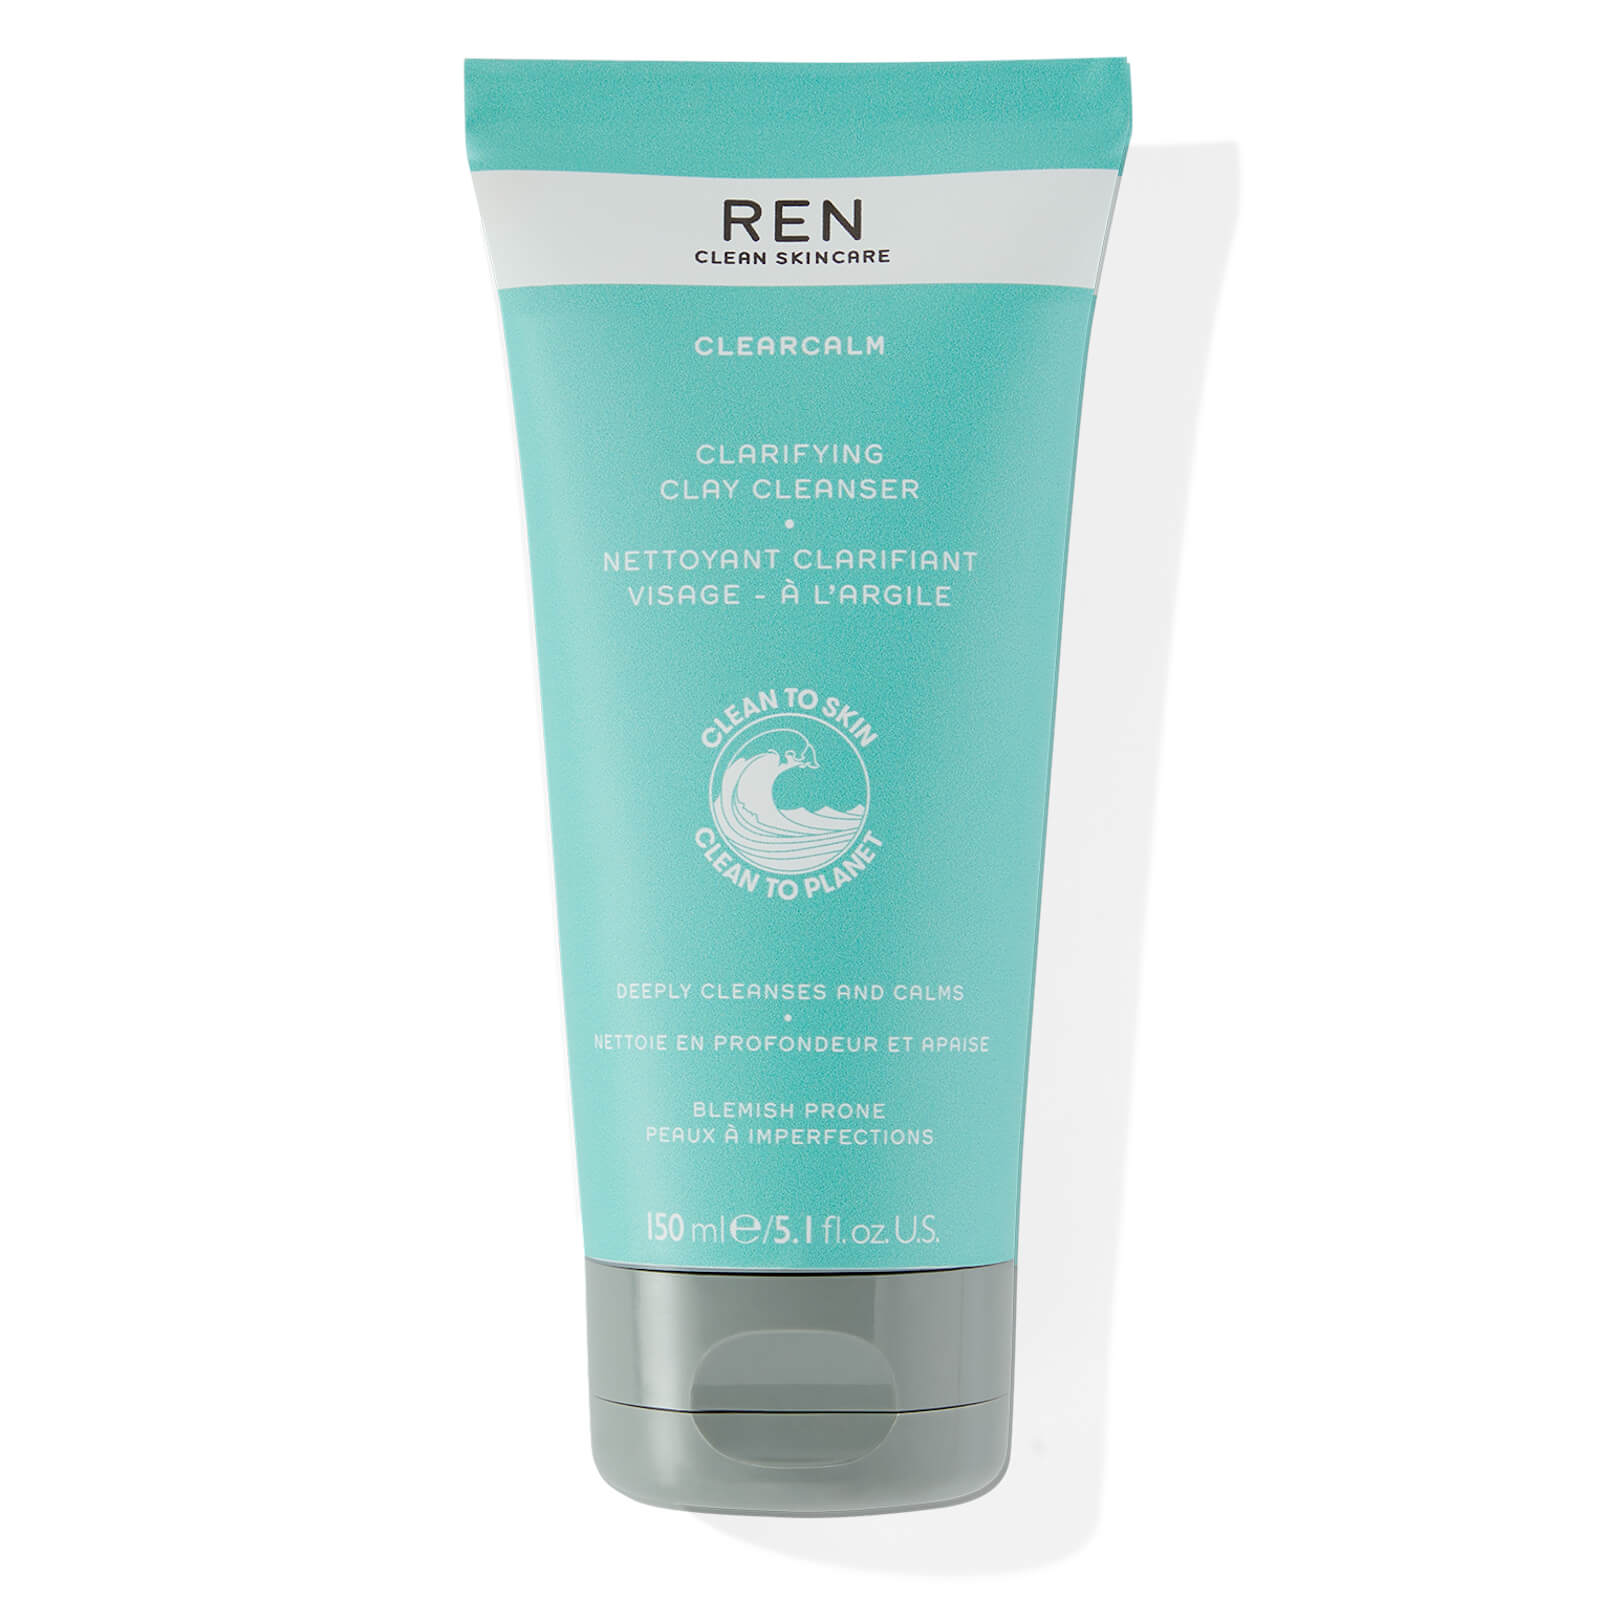 Ren Skincare Clearcalm Clarifying Clay Cleanser 150ml